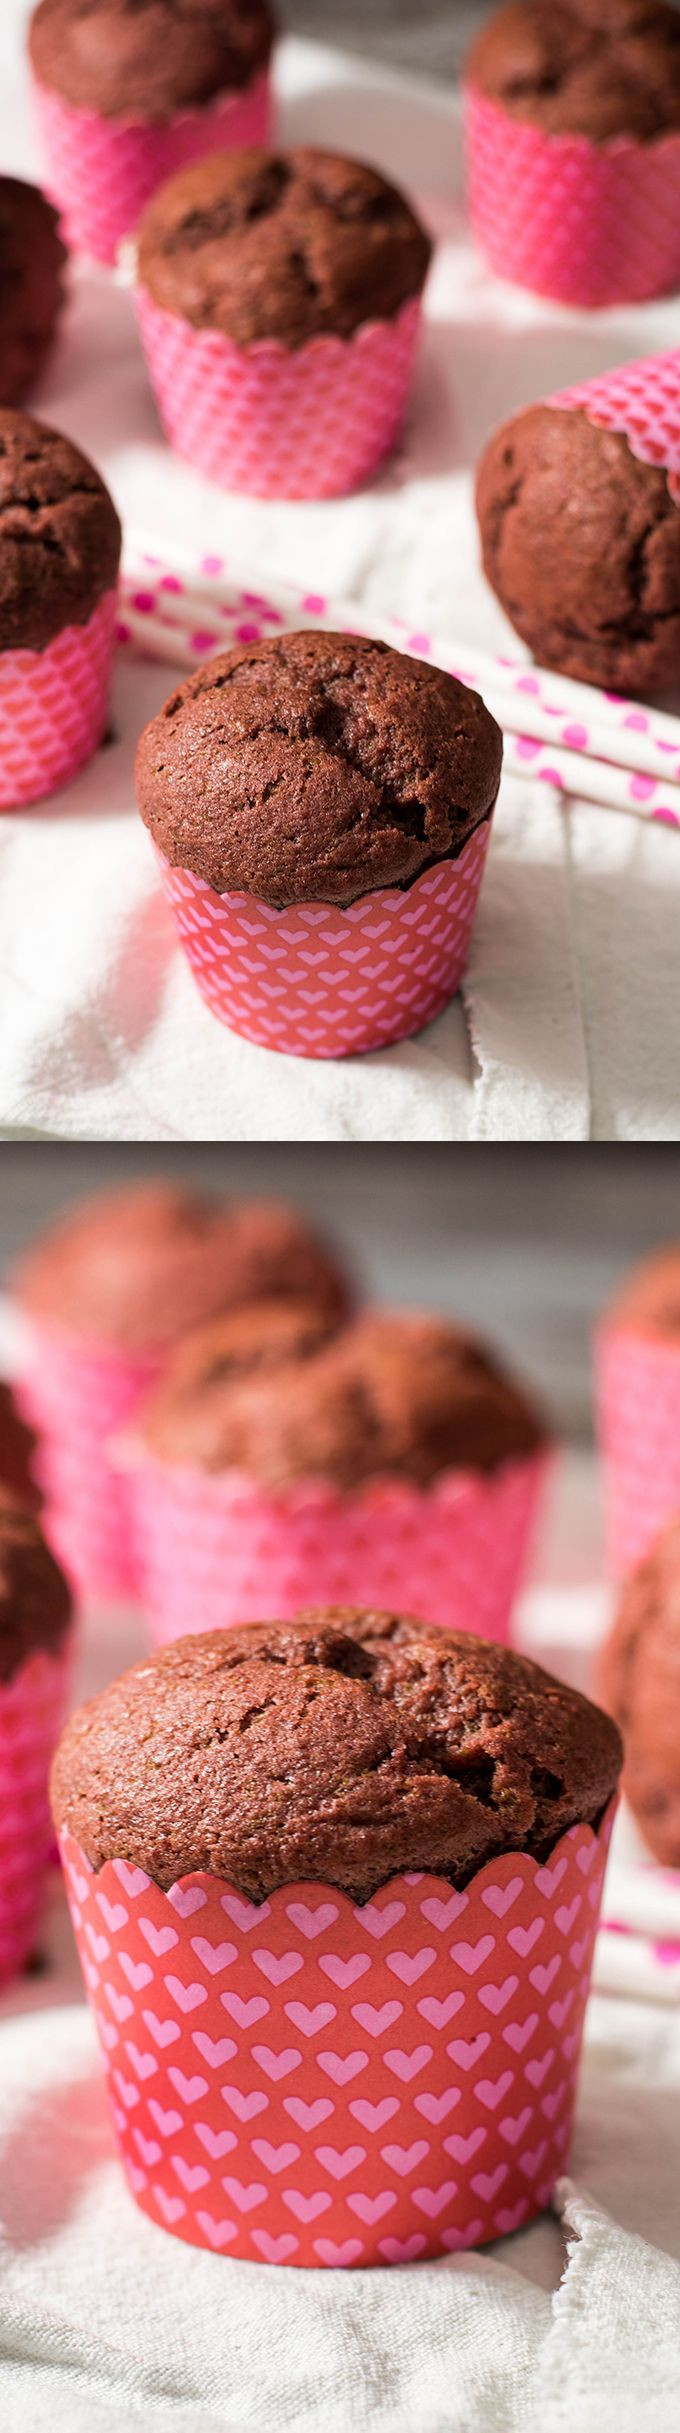 Beet Recipes For Kids
 453 best images about Mmmuffins on Pinterest